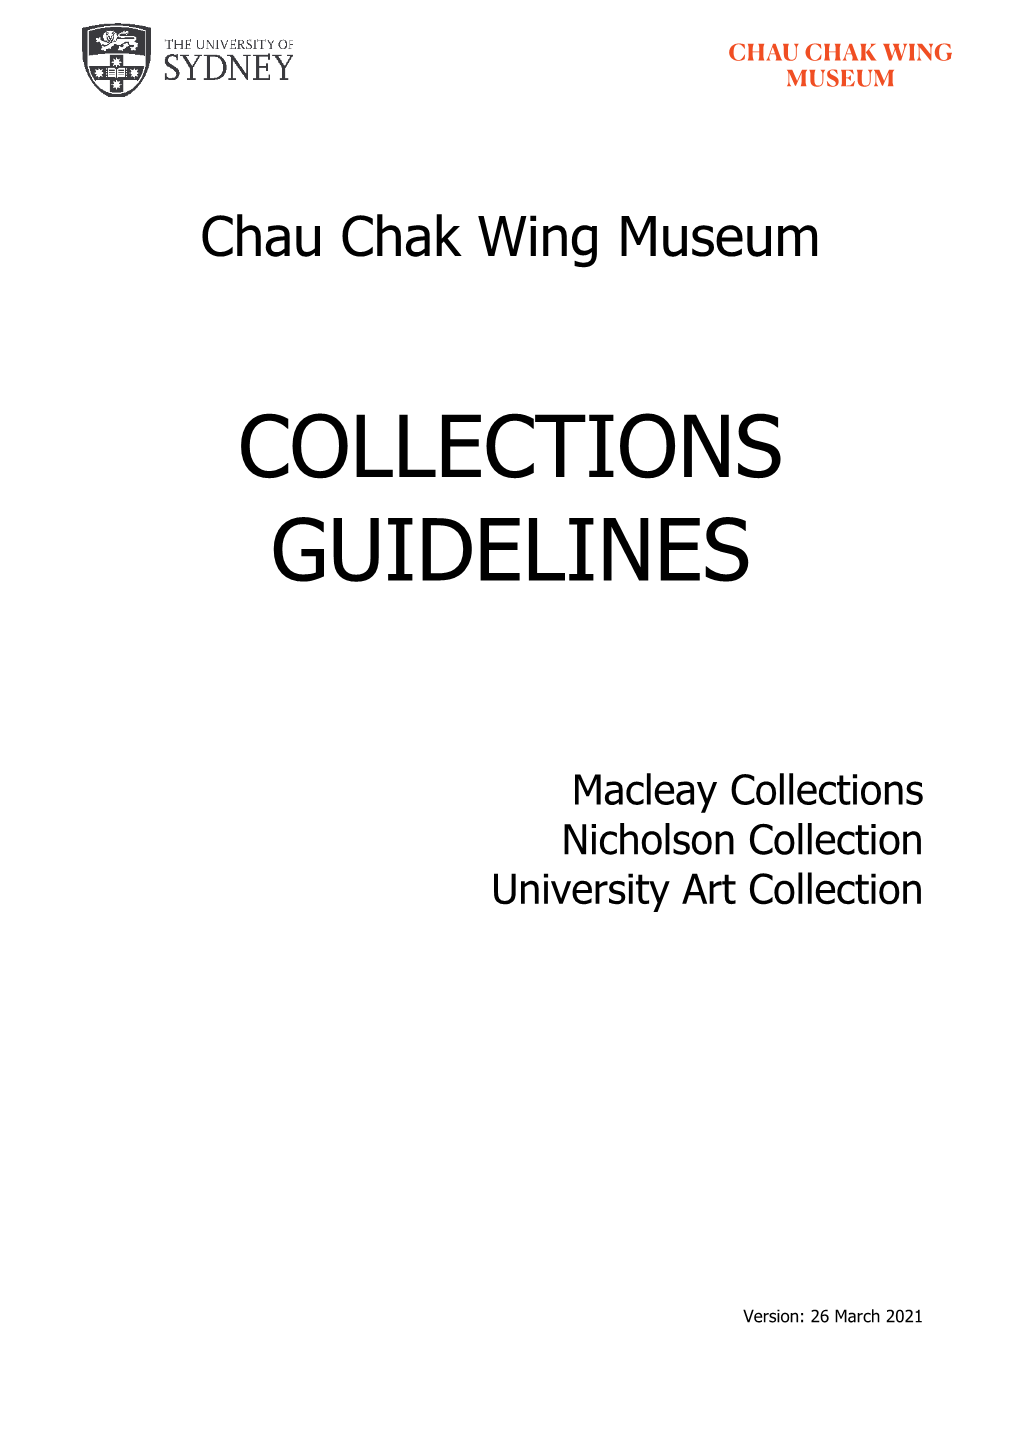 CCWM Collections Guidelines Will Be Reviewed Every Five Years and on an Ad Hoc Basis If Required